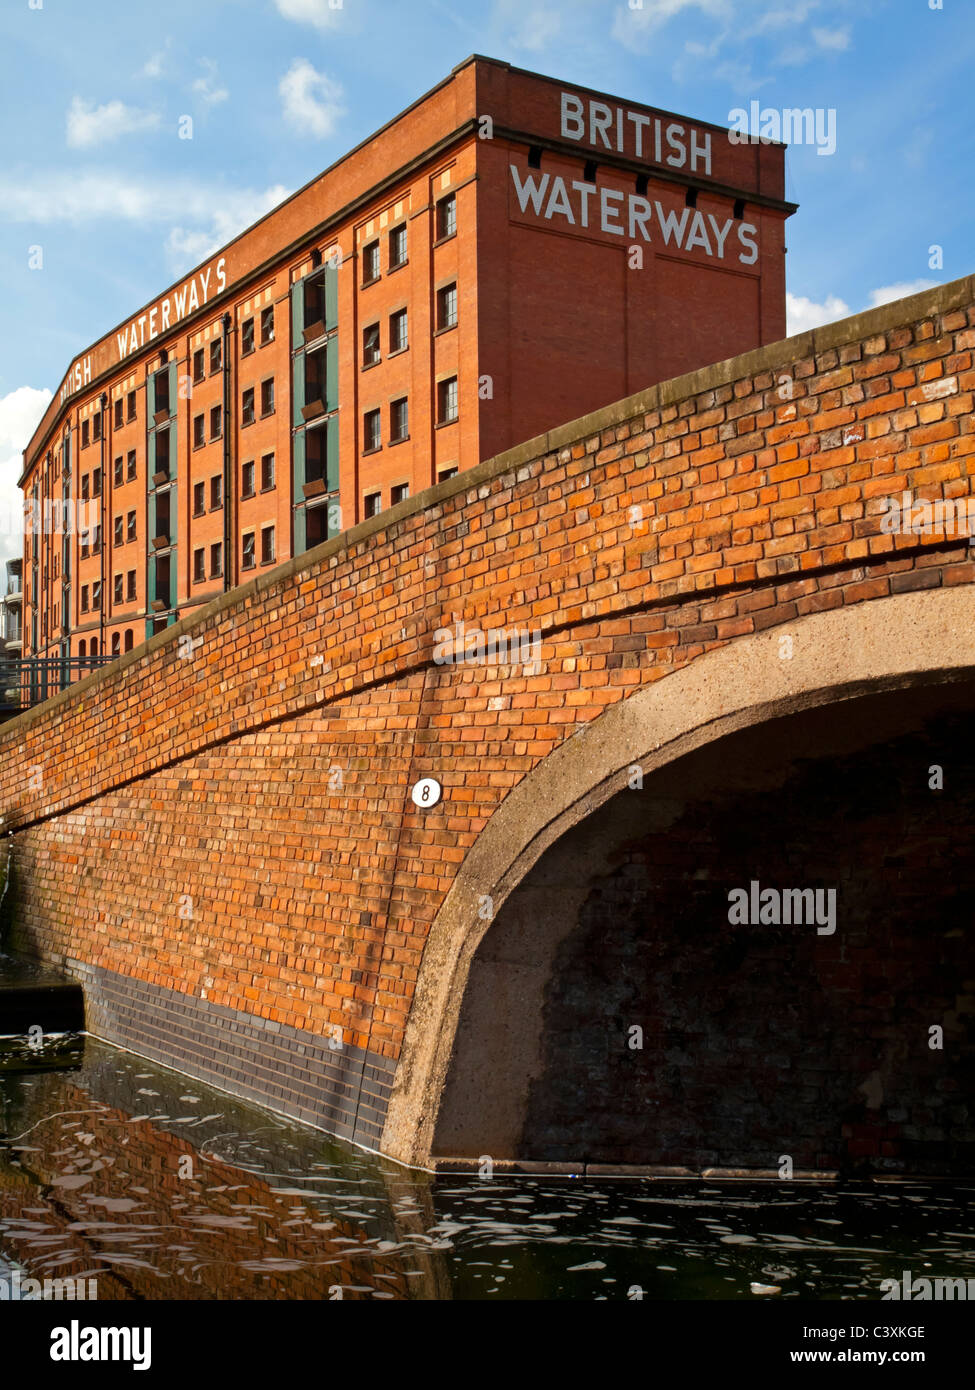 Newly restored British Waterways building in Nottingham city centre canal England UK Stock Photo